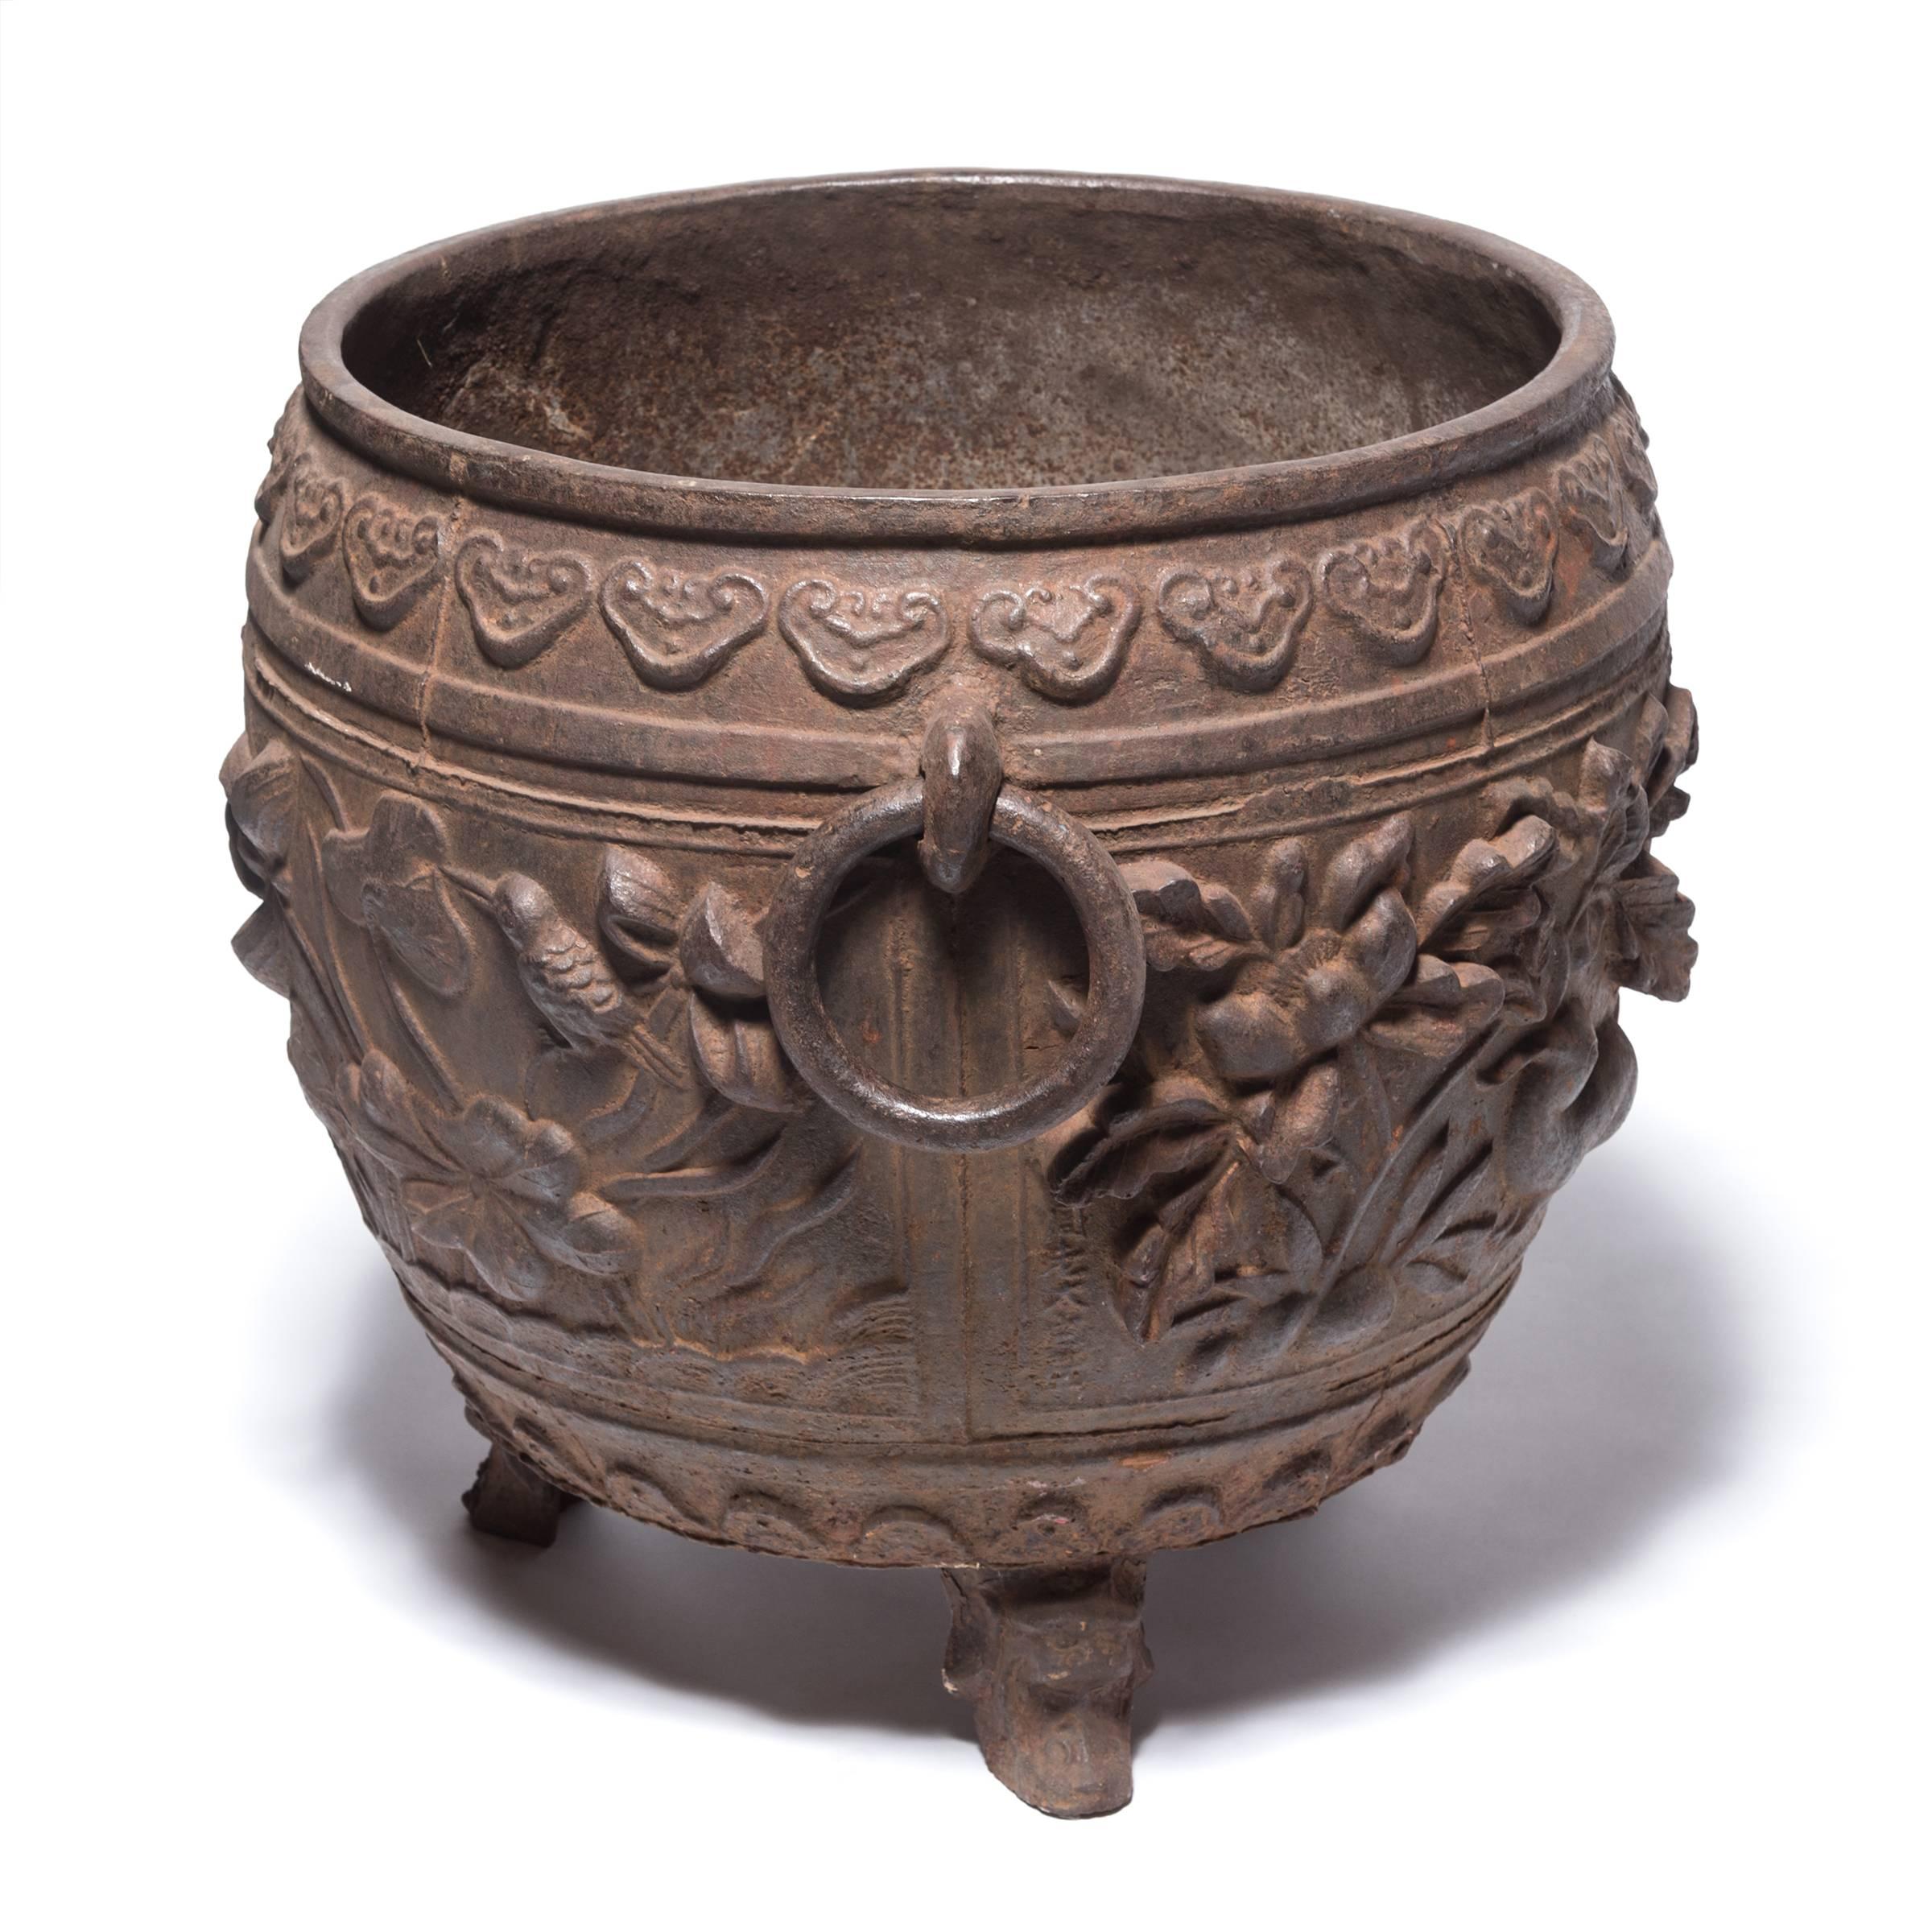 China was the earliest known civilizations to work with cast iron, first appearing thousands of years ago during the illustrious Zhou dynasty. Textured with floral motifs in high relief and balanced on tripod feet, this contemporary urn references